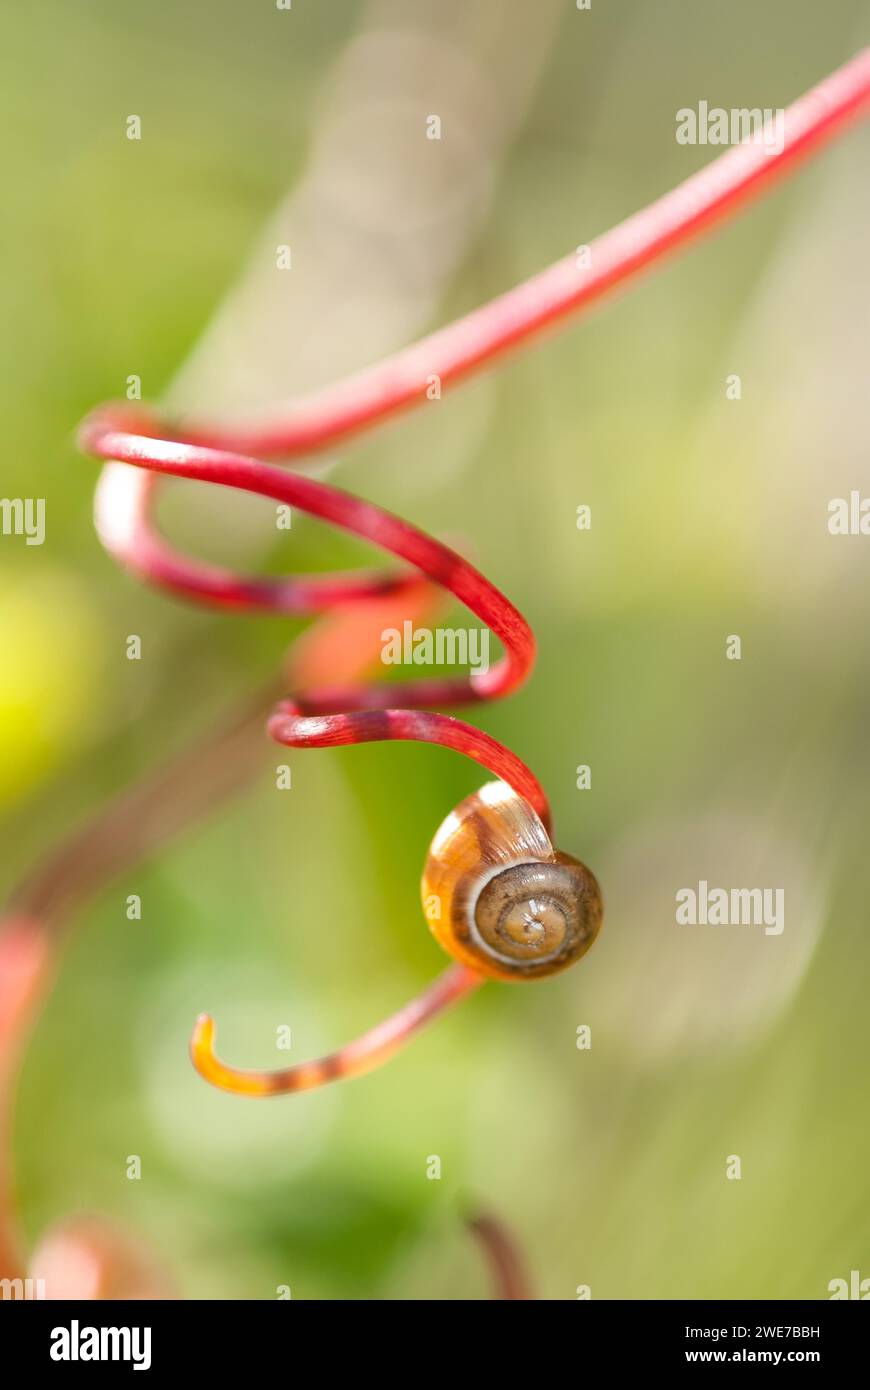 Snail shell of a land snail (Stylommatophora) on a red, spirally twisted vine (Vitis sp.), symbolising calm, peace, mindfulness, relaxation, the Stock Photo